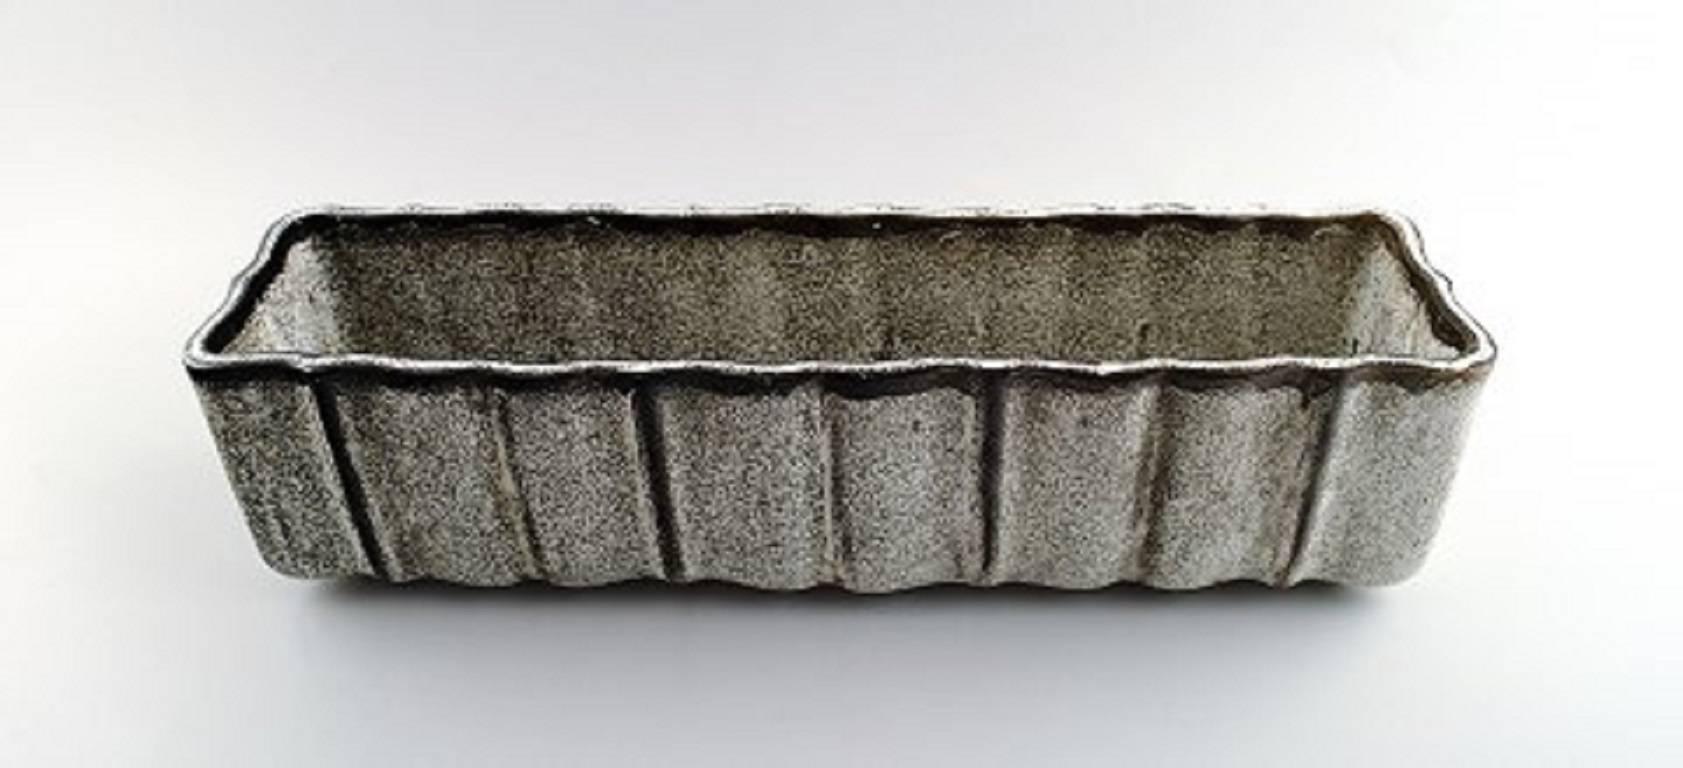 Kähler, Denmark, glazed stoneware large-jardinière / flowerbowl, 1930s.

Designed by Svend Hammershøi. Glaze in black and gray.

Measures: 40 x 10.5 x 9.5 cm.

Hallmarked.

In perfect condition.